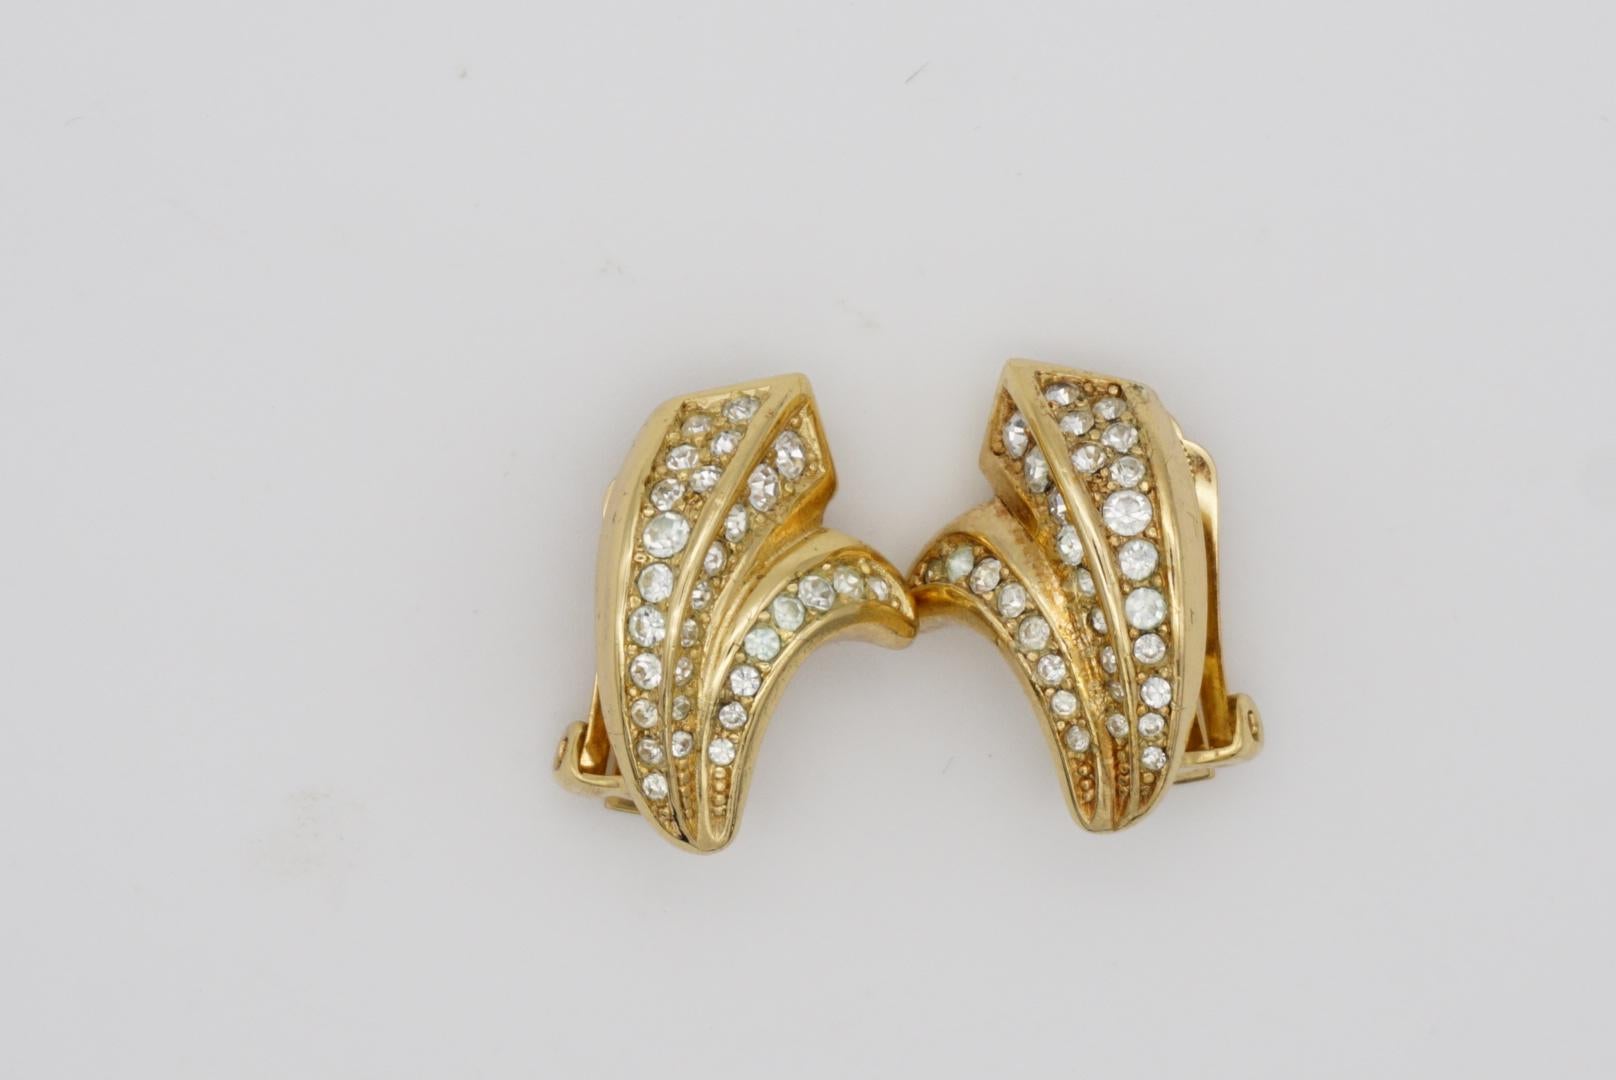 Christian Dior Vintage 1980s Flowers Leaf Crystals Timeless Gold Clip Earrings For Sale 4